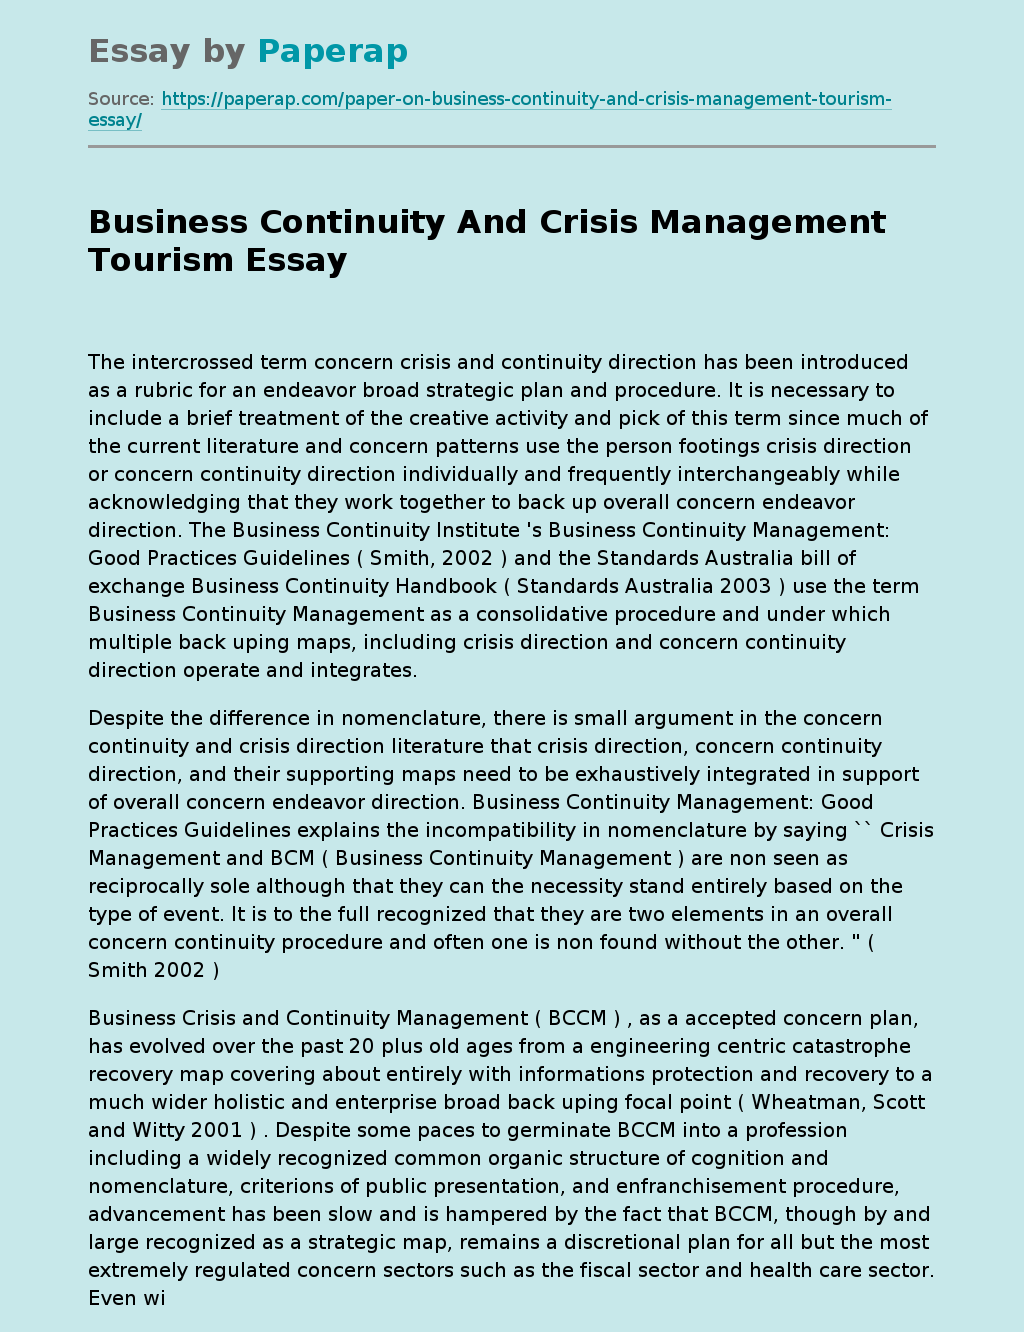 Business Continuity And Crisis Management Tourism